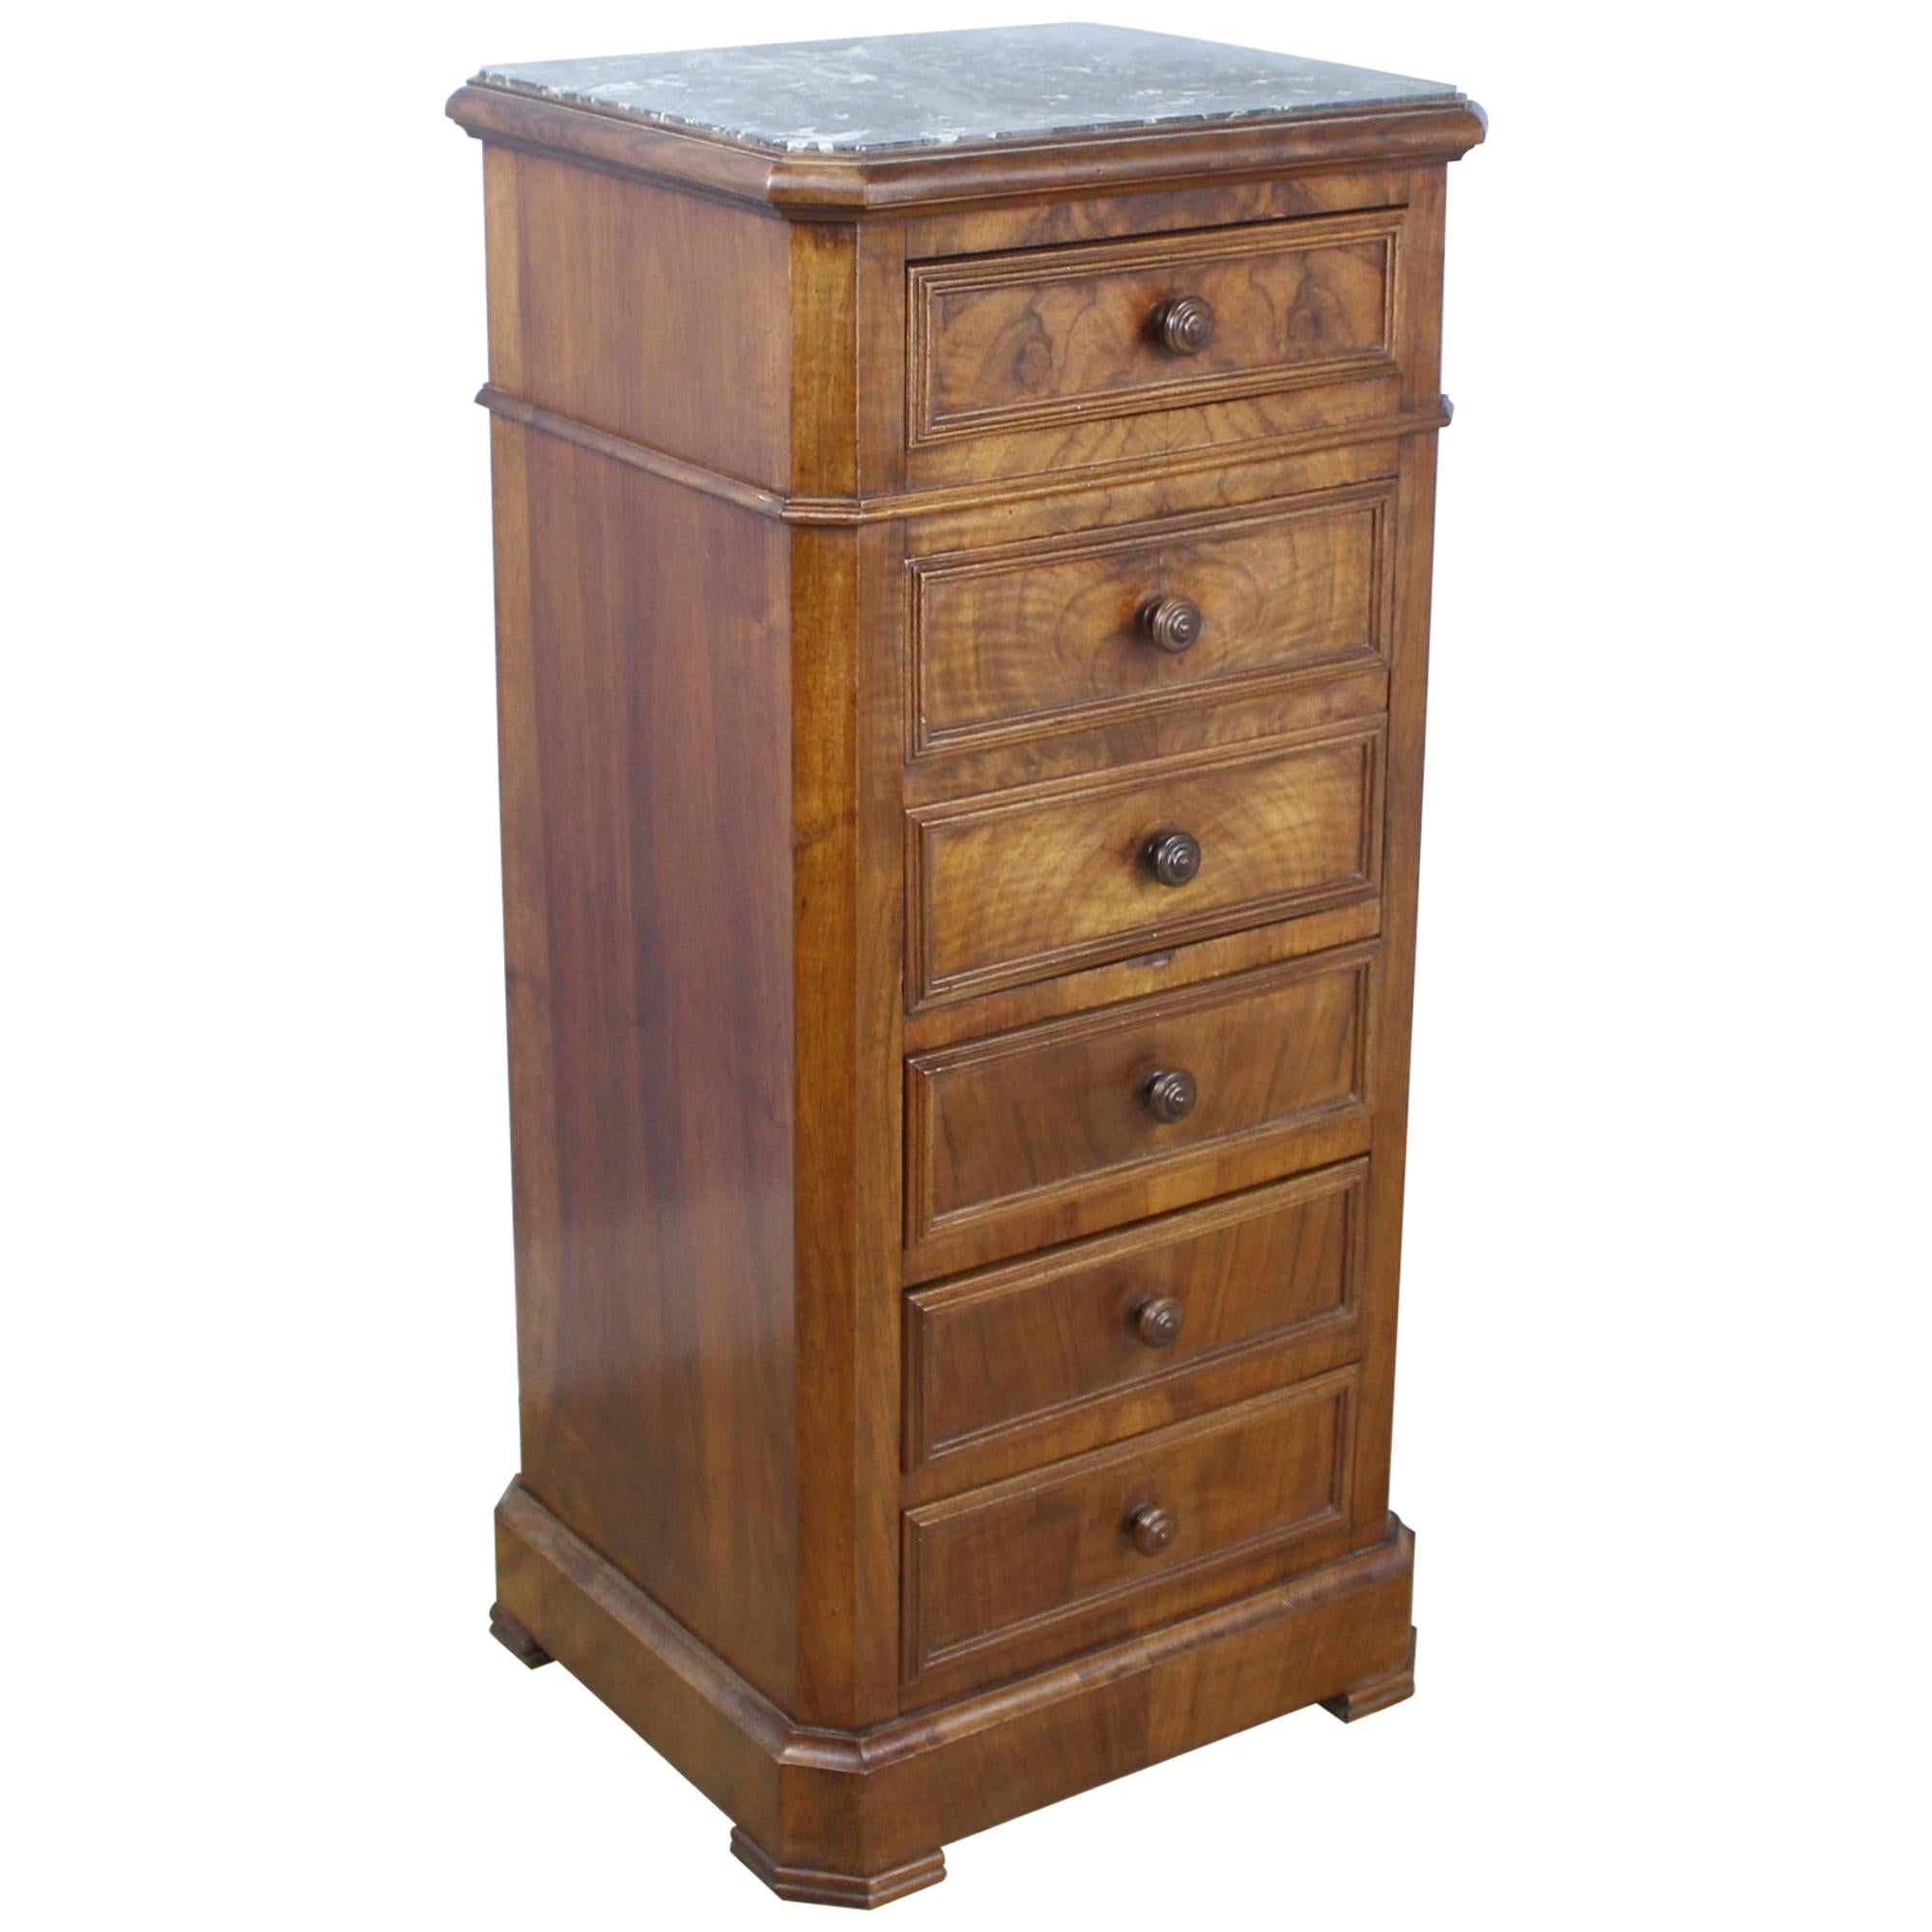 Antique Burr Walnut Nightstand with Gray Marble Top